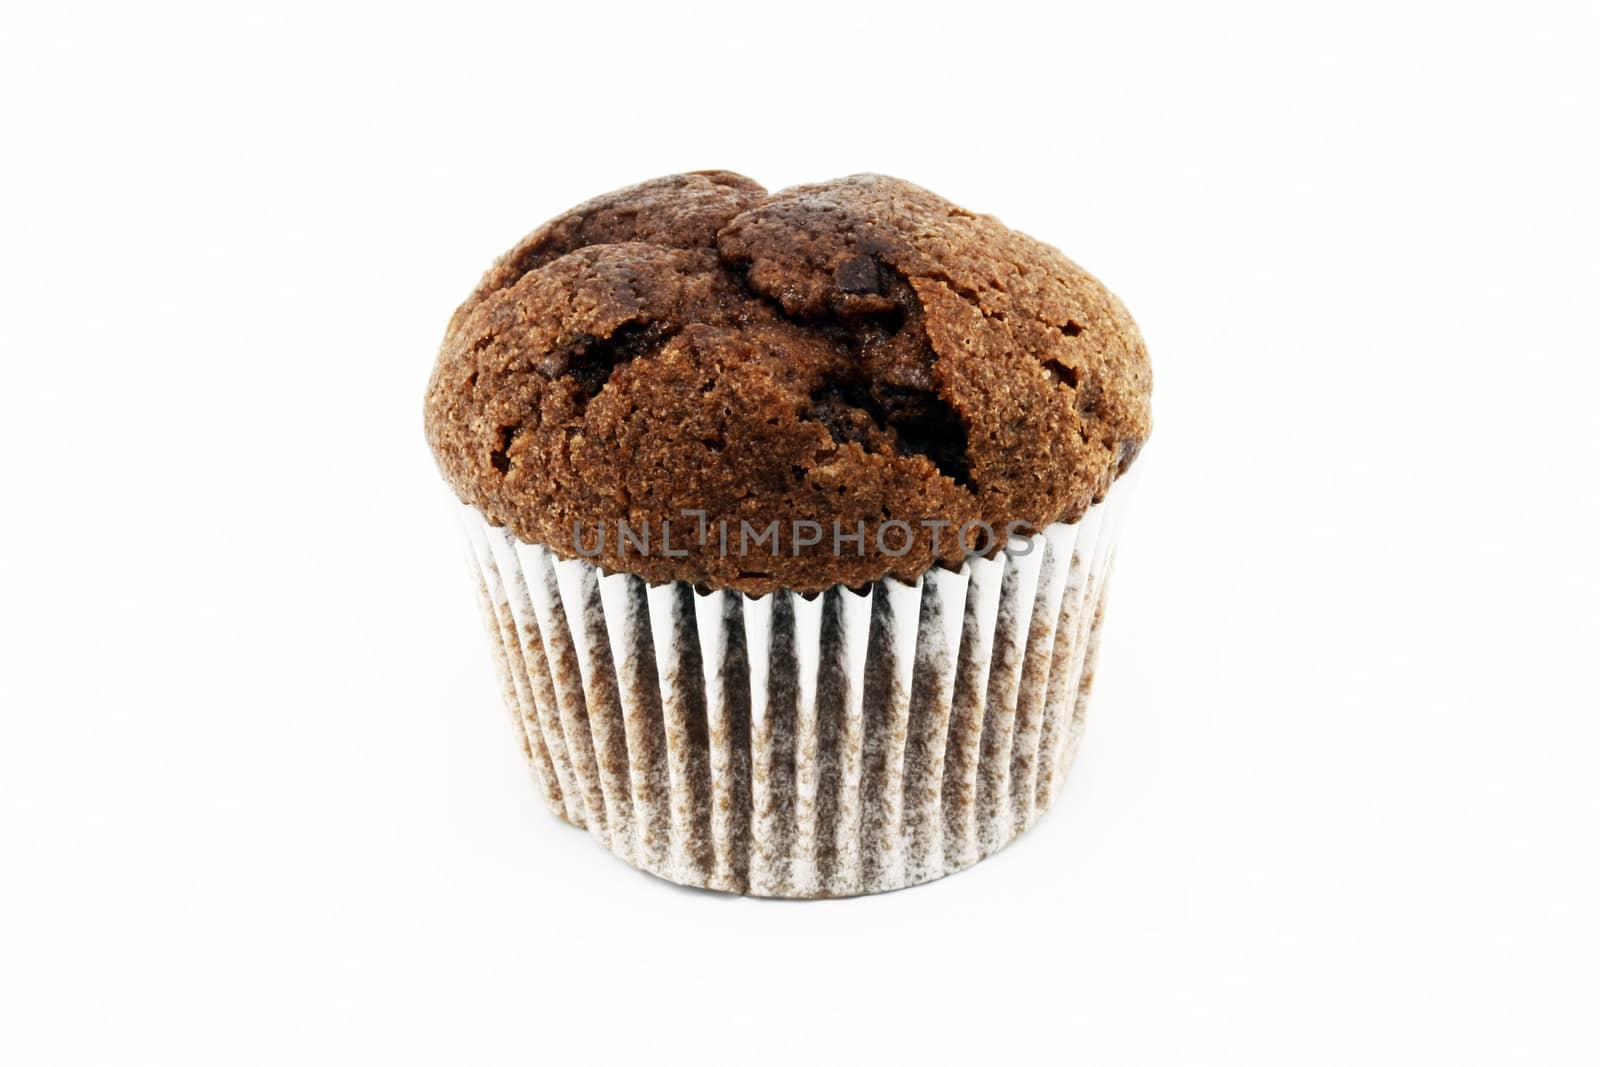 Muffin by magraphics